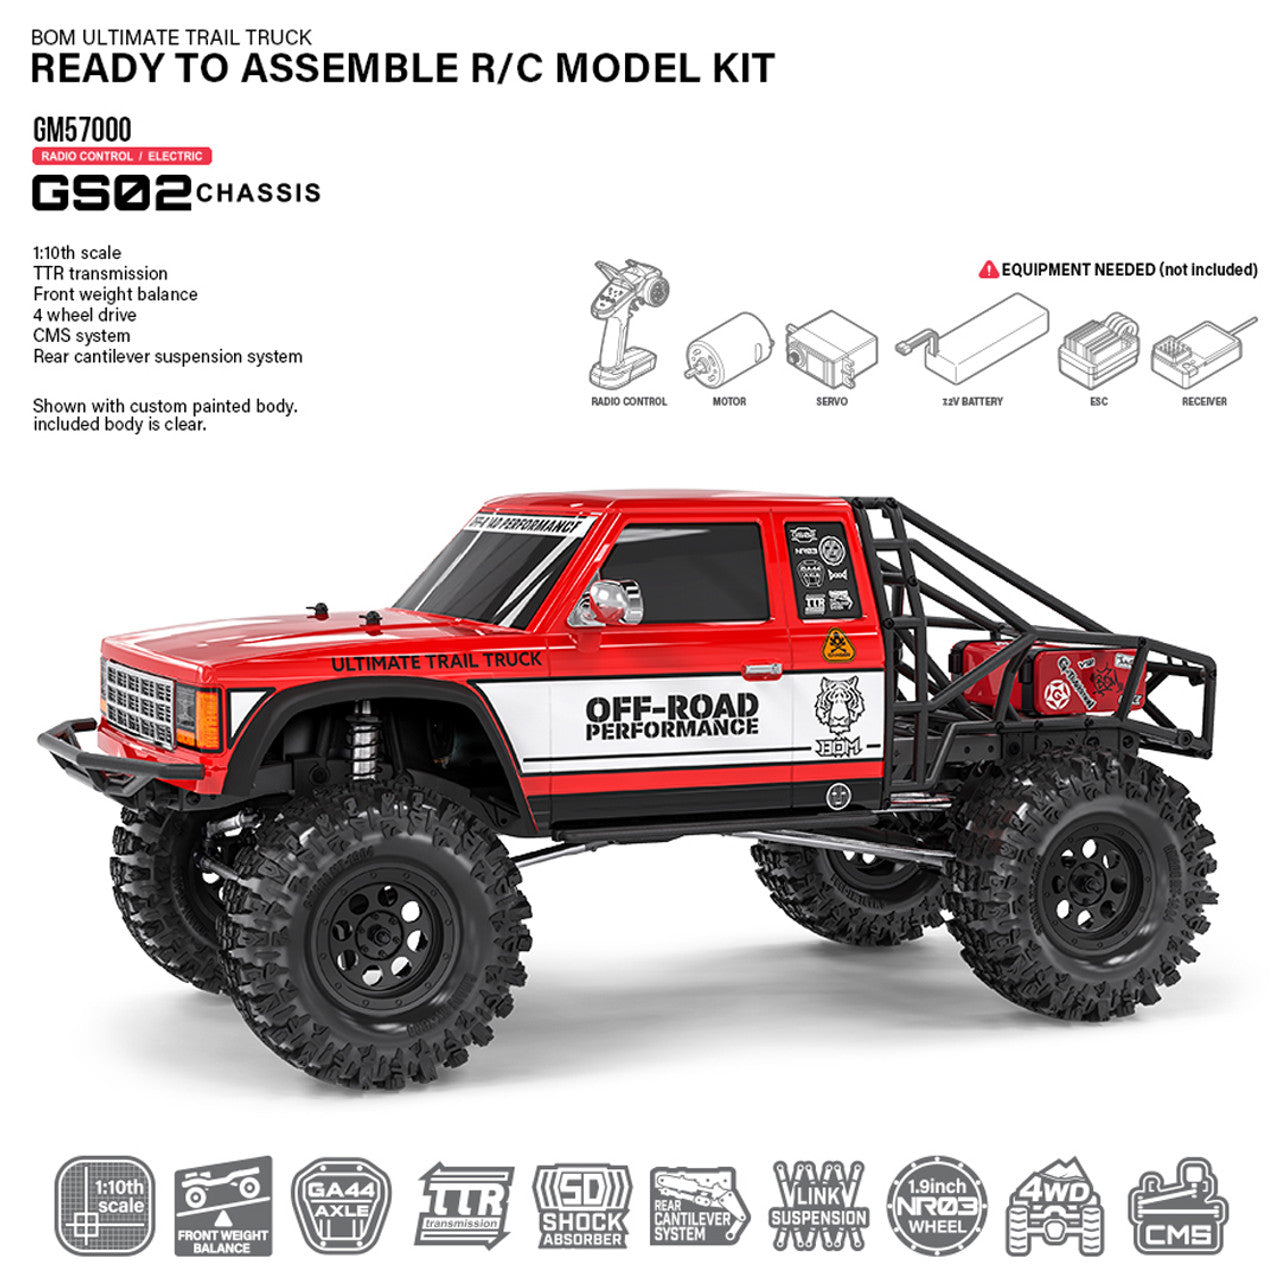 Gmade GM57000 GS02 BOM Ultimate 4×4 1/10 4WD Trail Truck Assembly